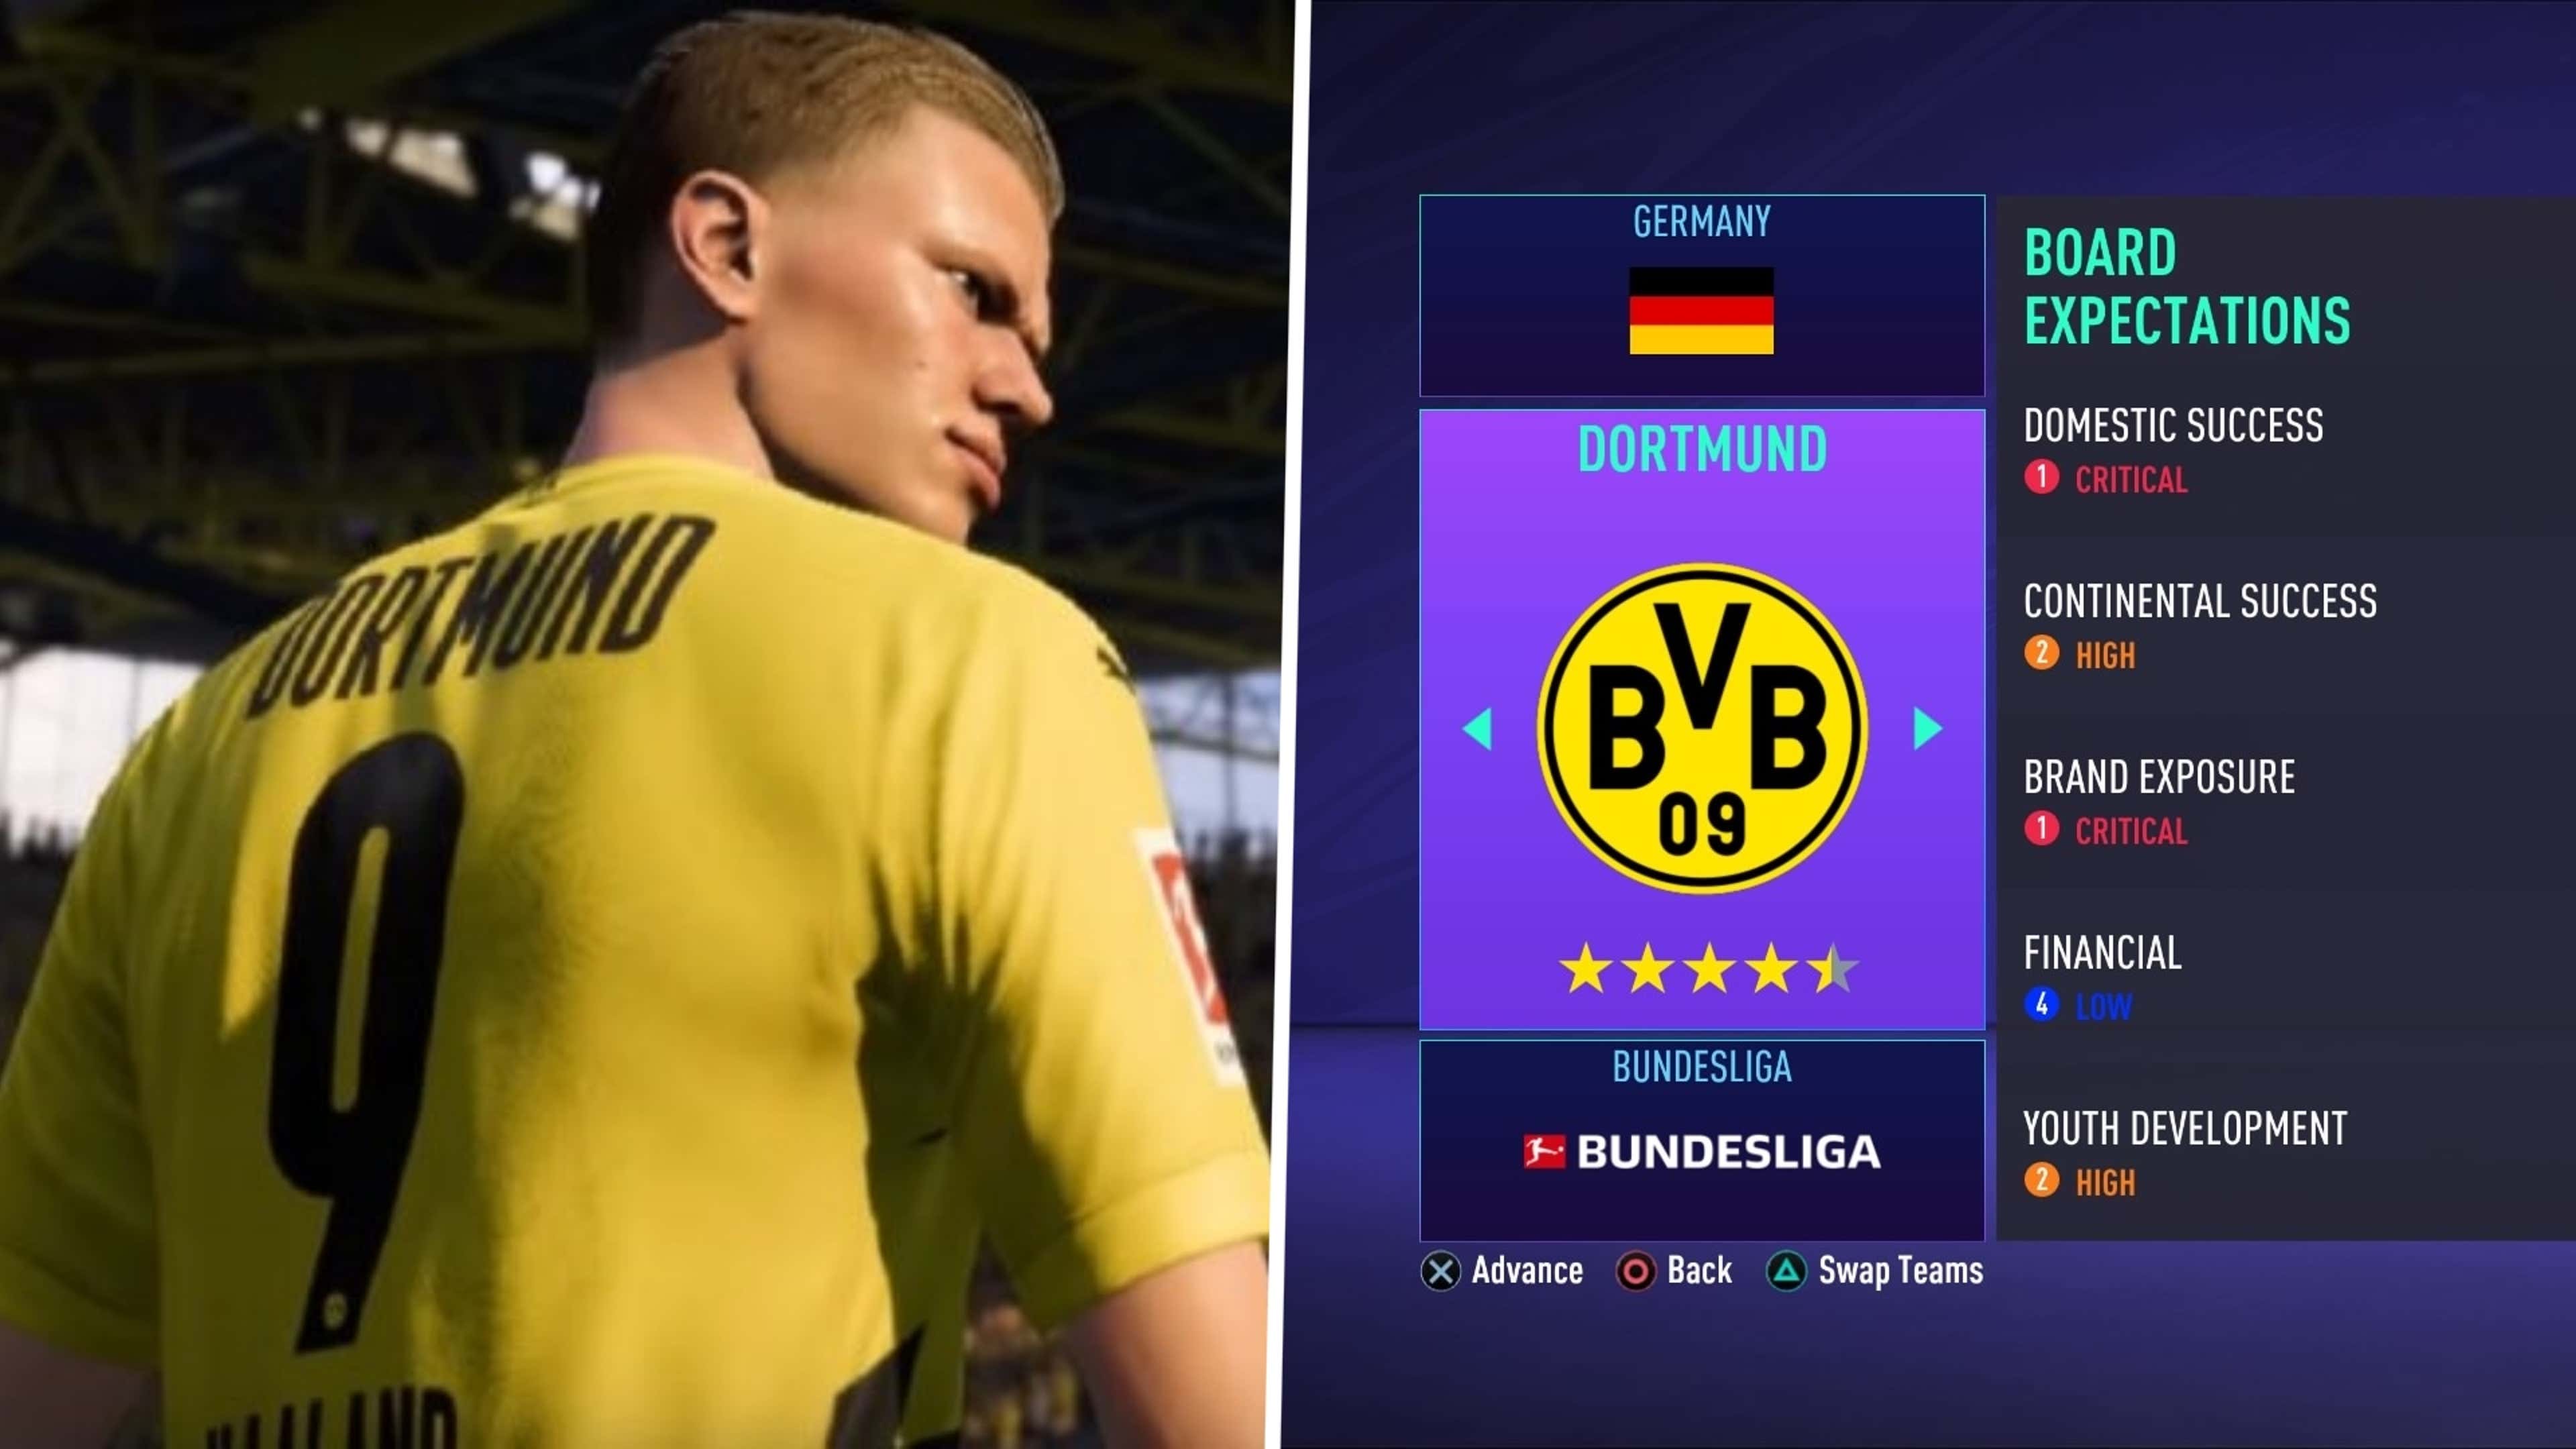 FIFA 22: Best teams to use on Career Mode